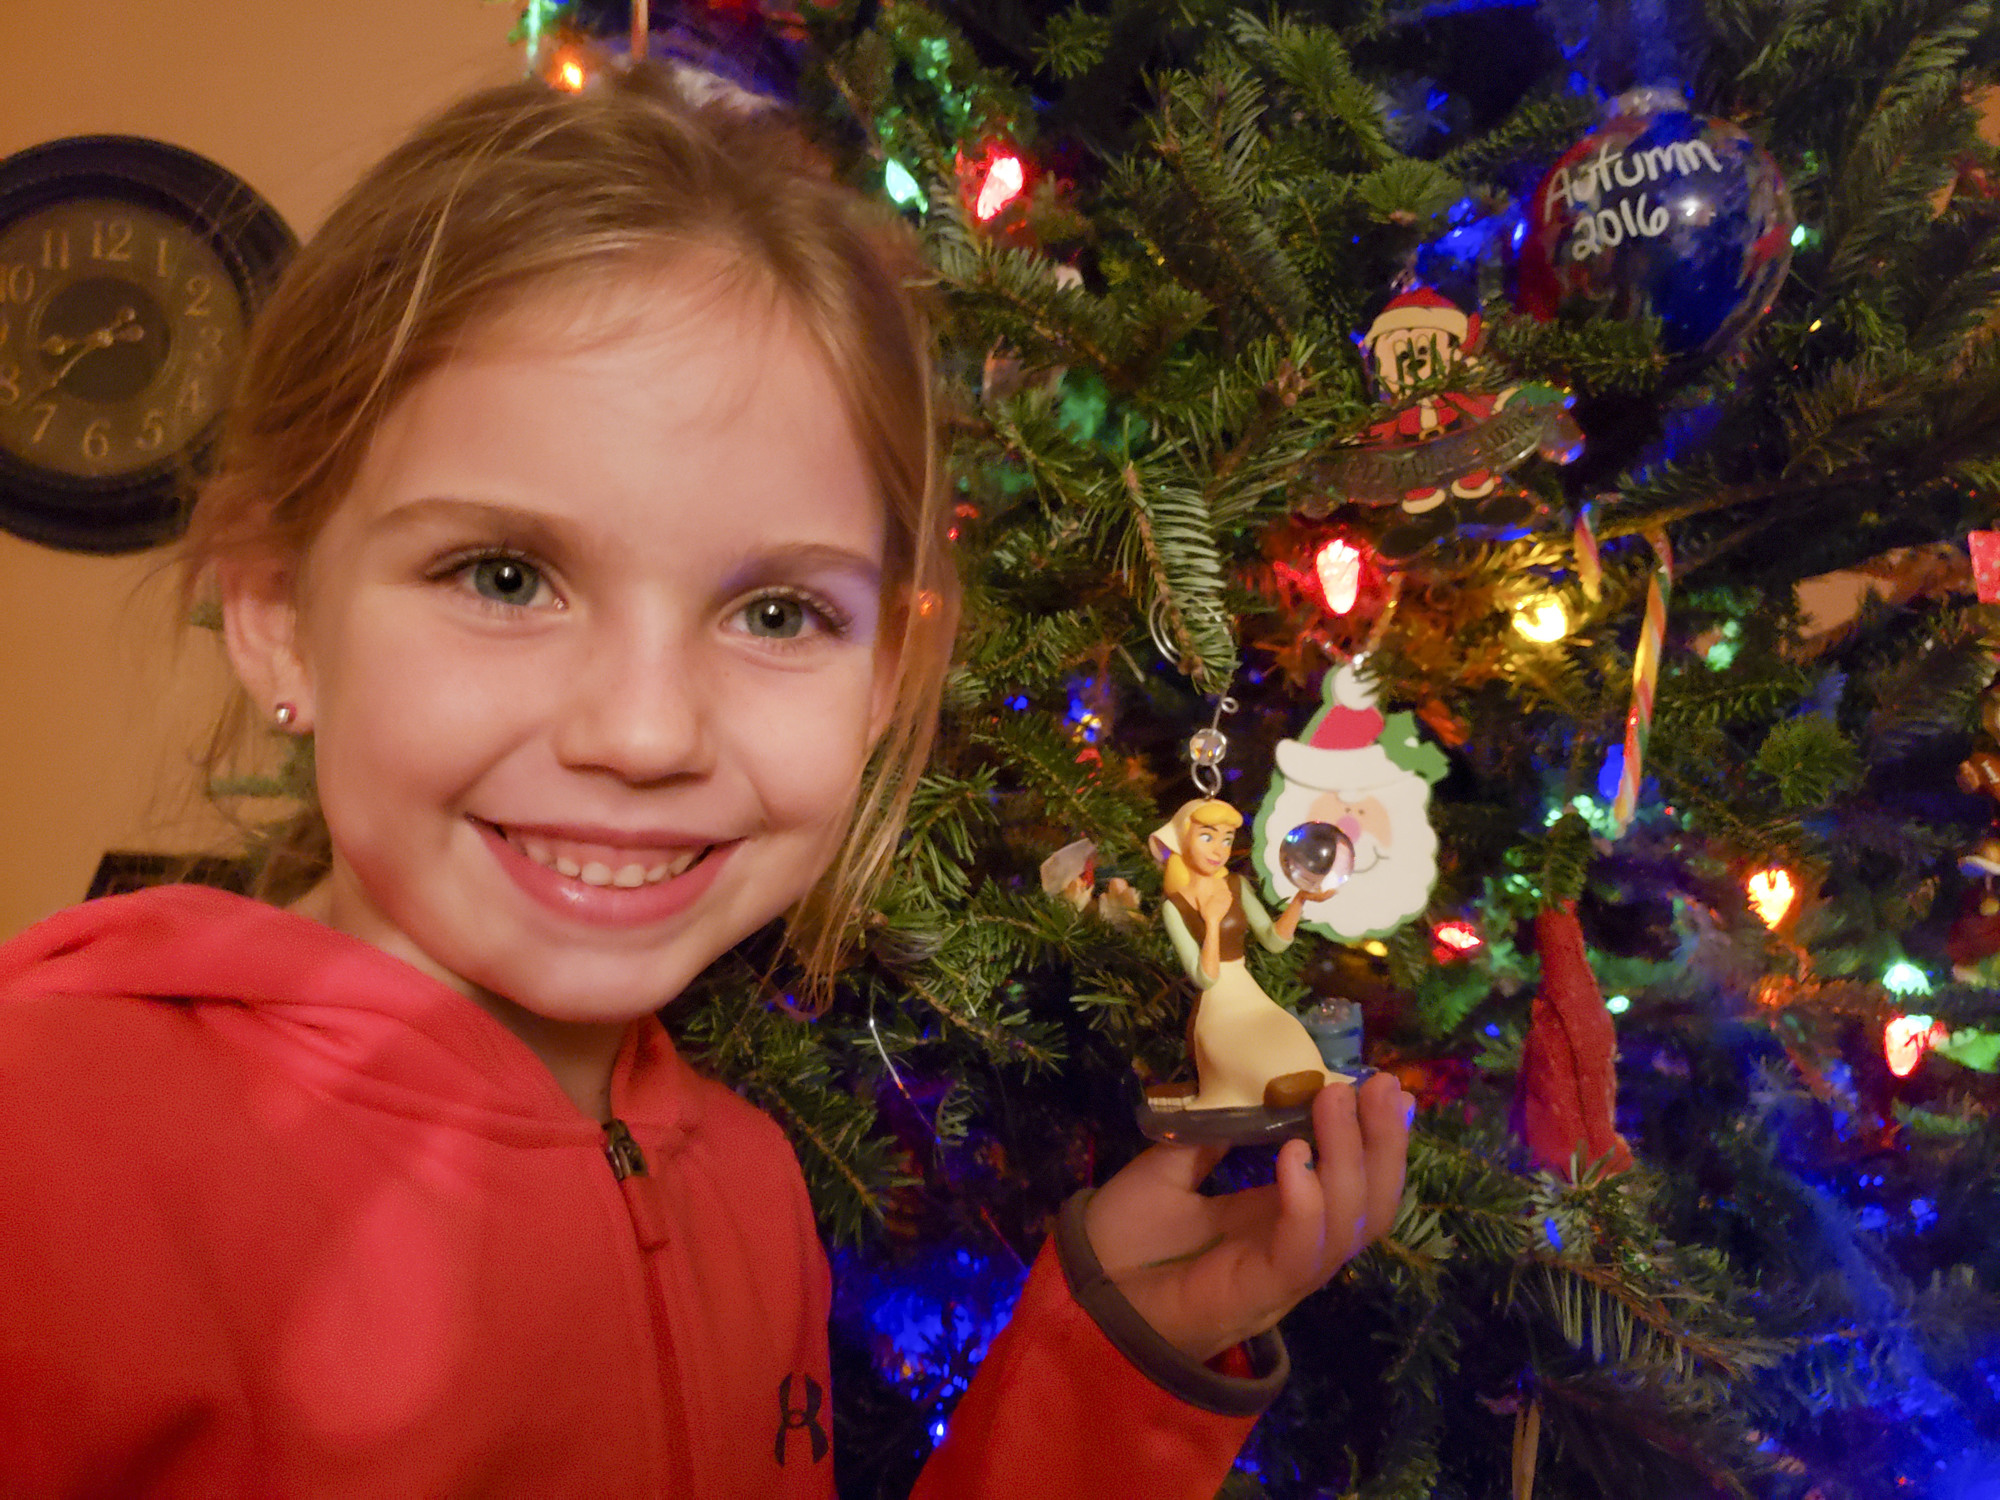 Autumn Bryan and her favorite ornament,